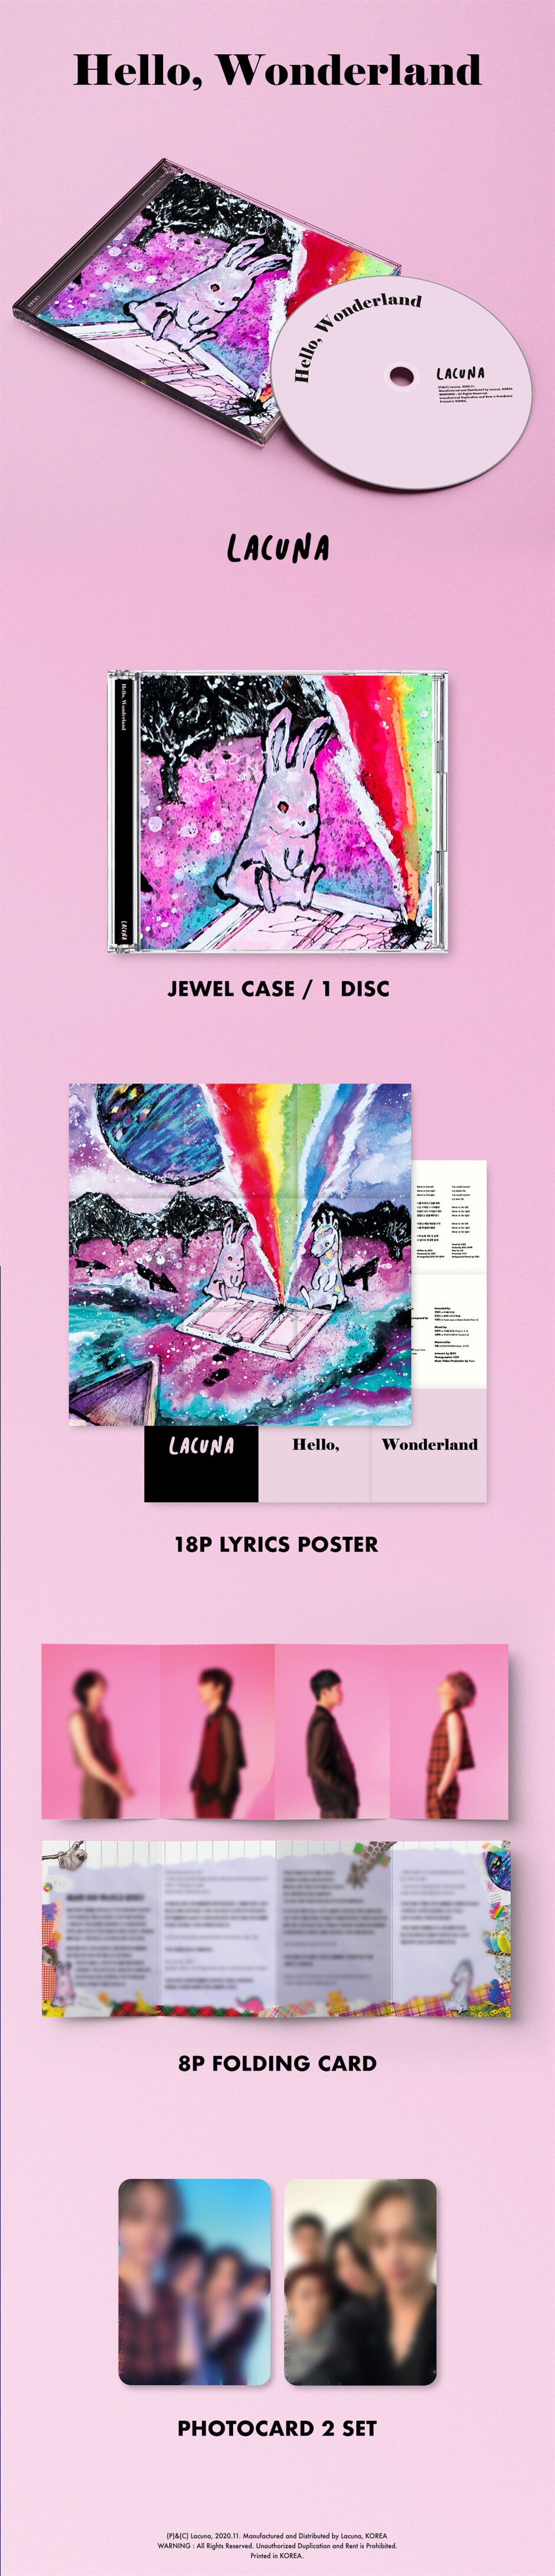 1 CD
1 Lyrics Poster (18 pages)
1 Folding Card (8 pages)
2 Photo Cards